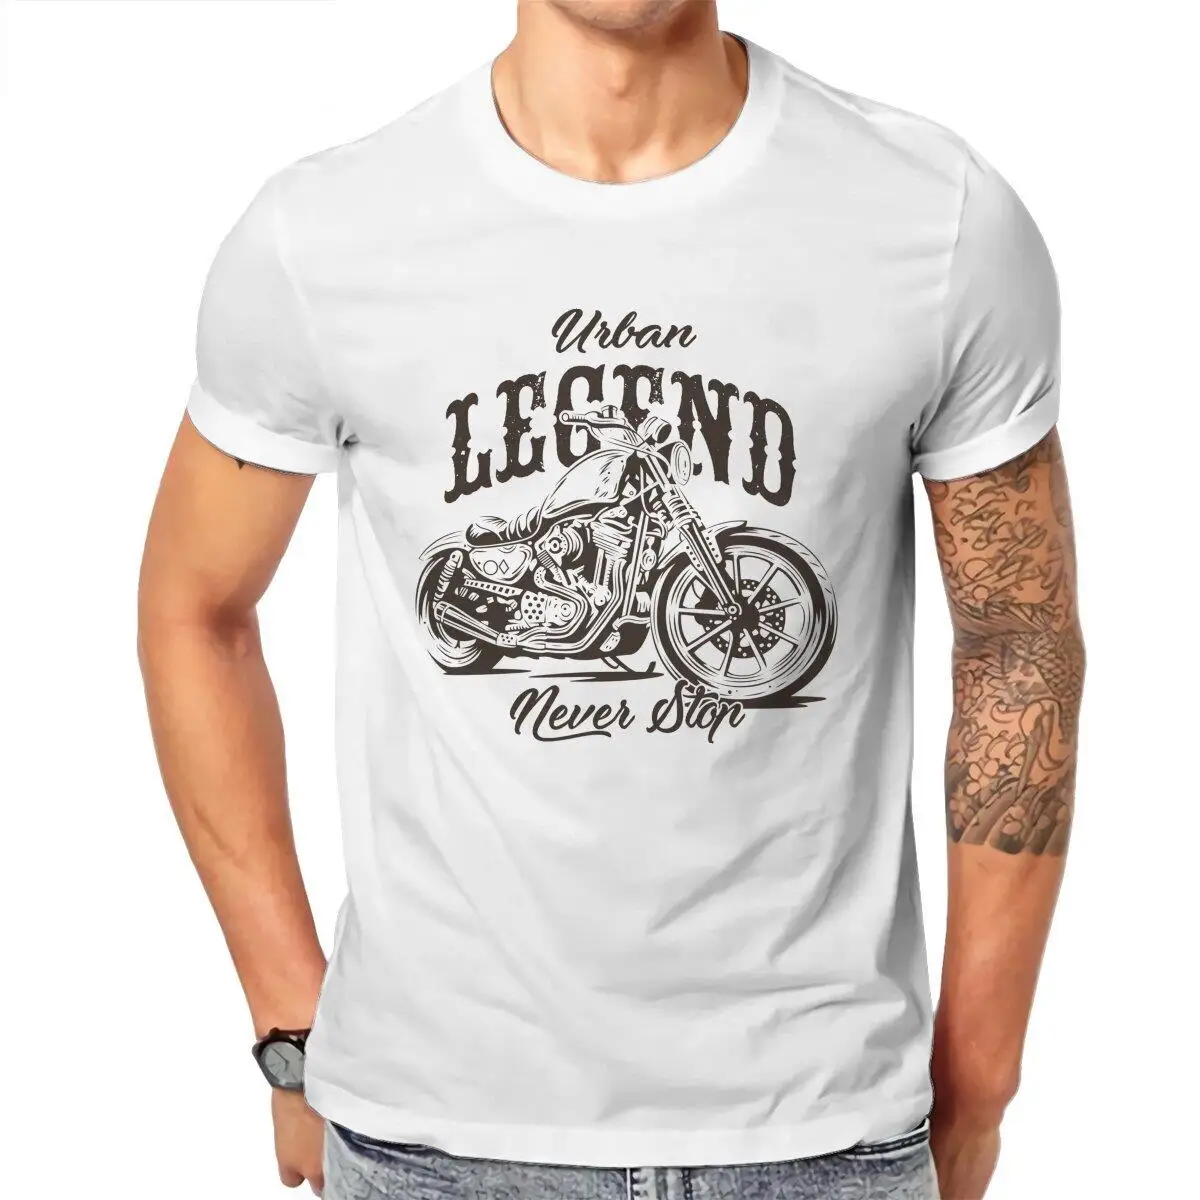 Men T-Shirts Legend Motorcycle  Funny Pure Cotton Tees Short Sleeve  T Shirts Round Neck Tops Birthday Present